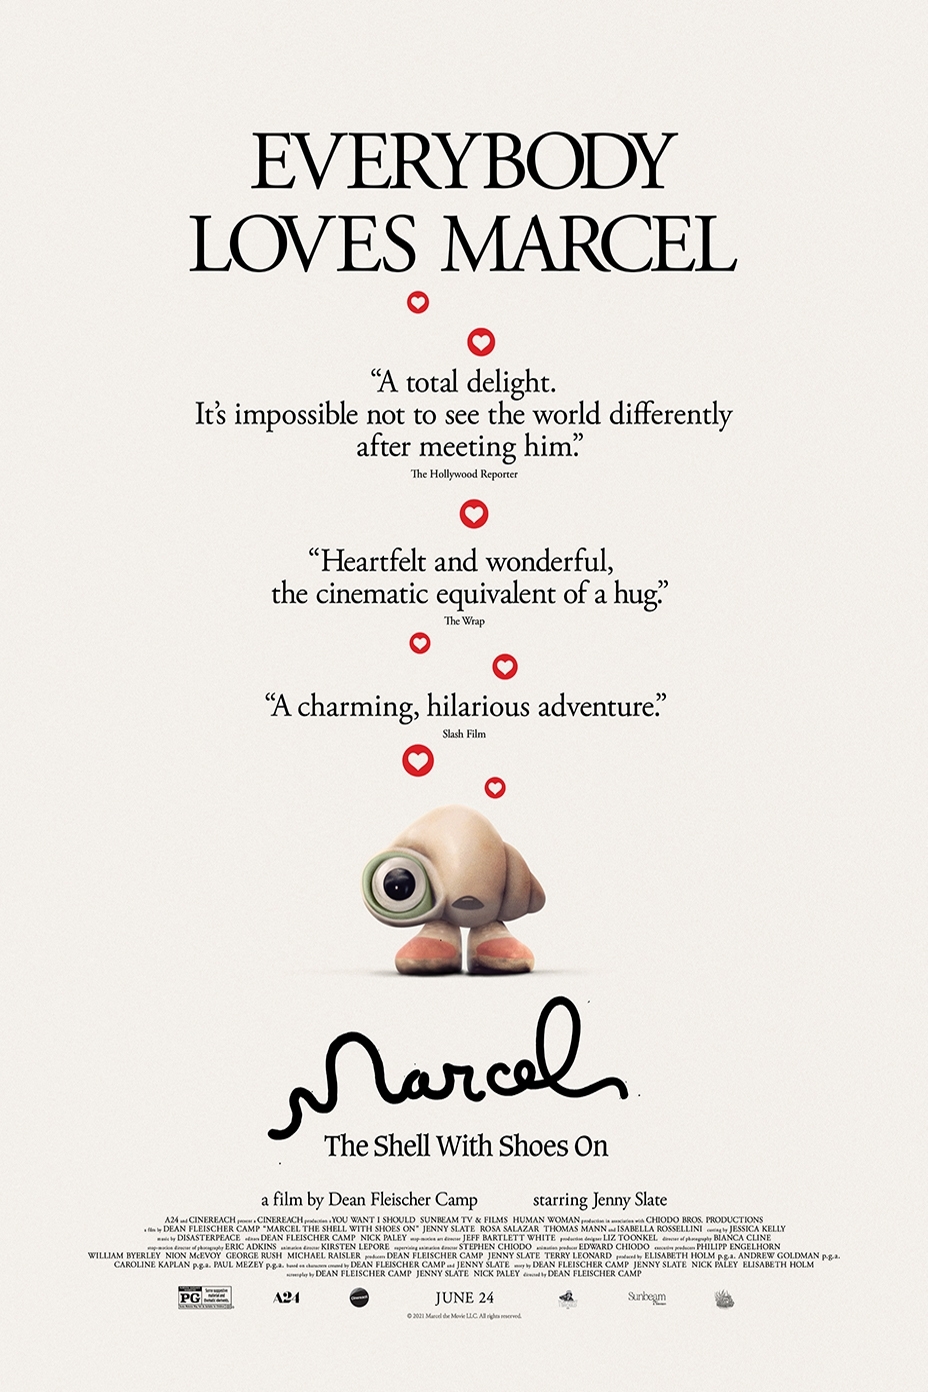 Still of Marcel the Shell with Shoes On